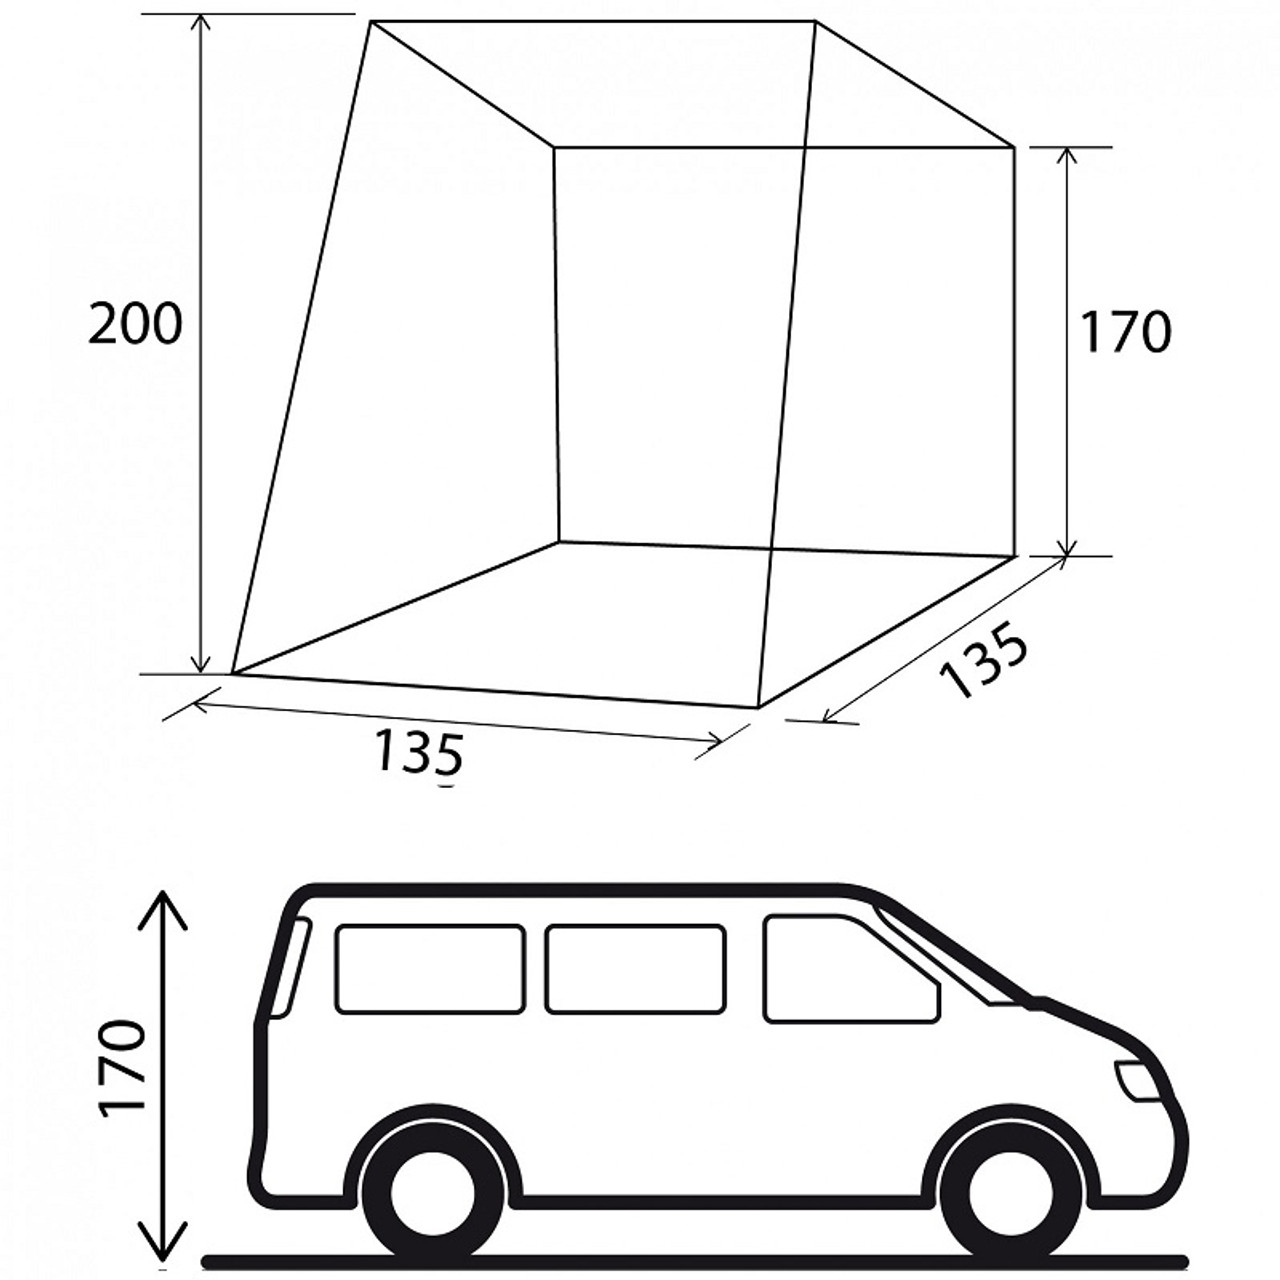 Tail tent VW CADDY 5 PREMIUM (for VW Caddy 5 from 2021)